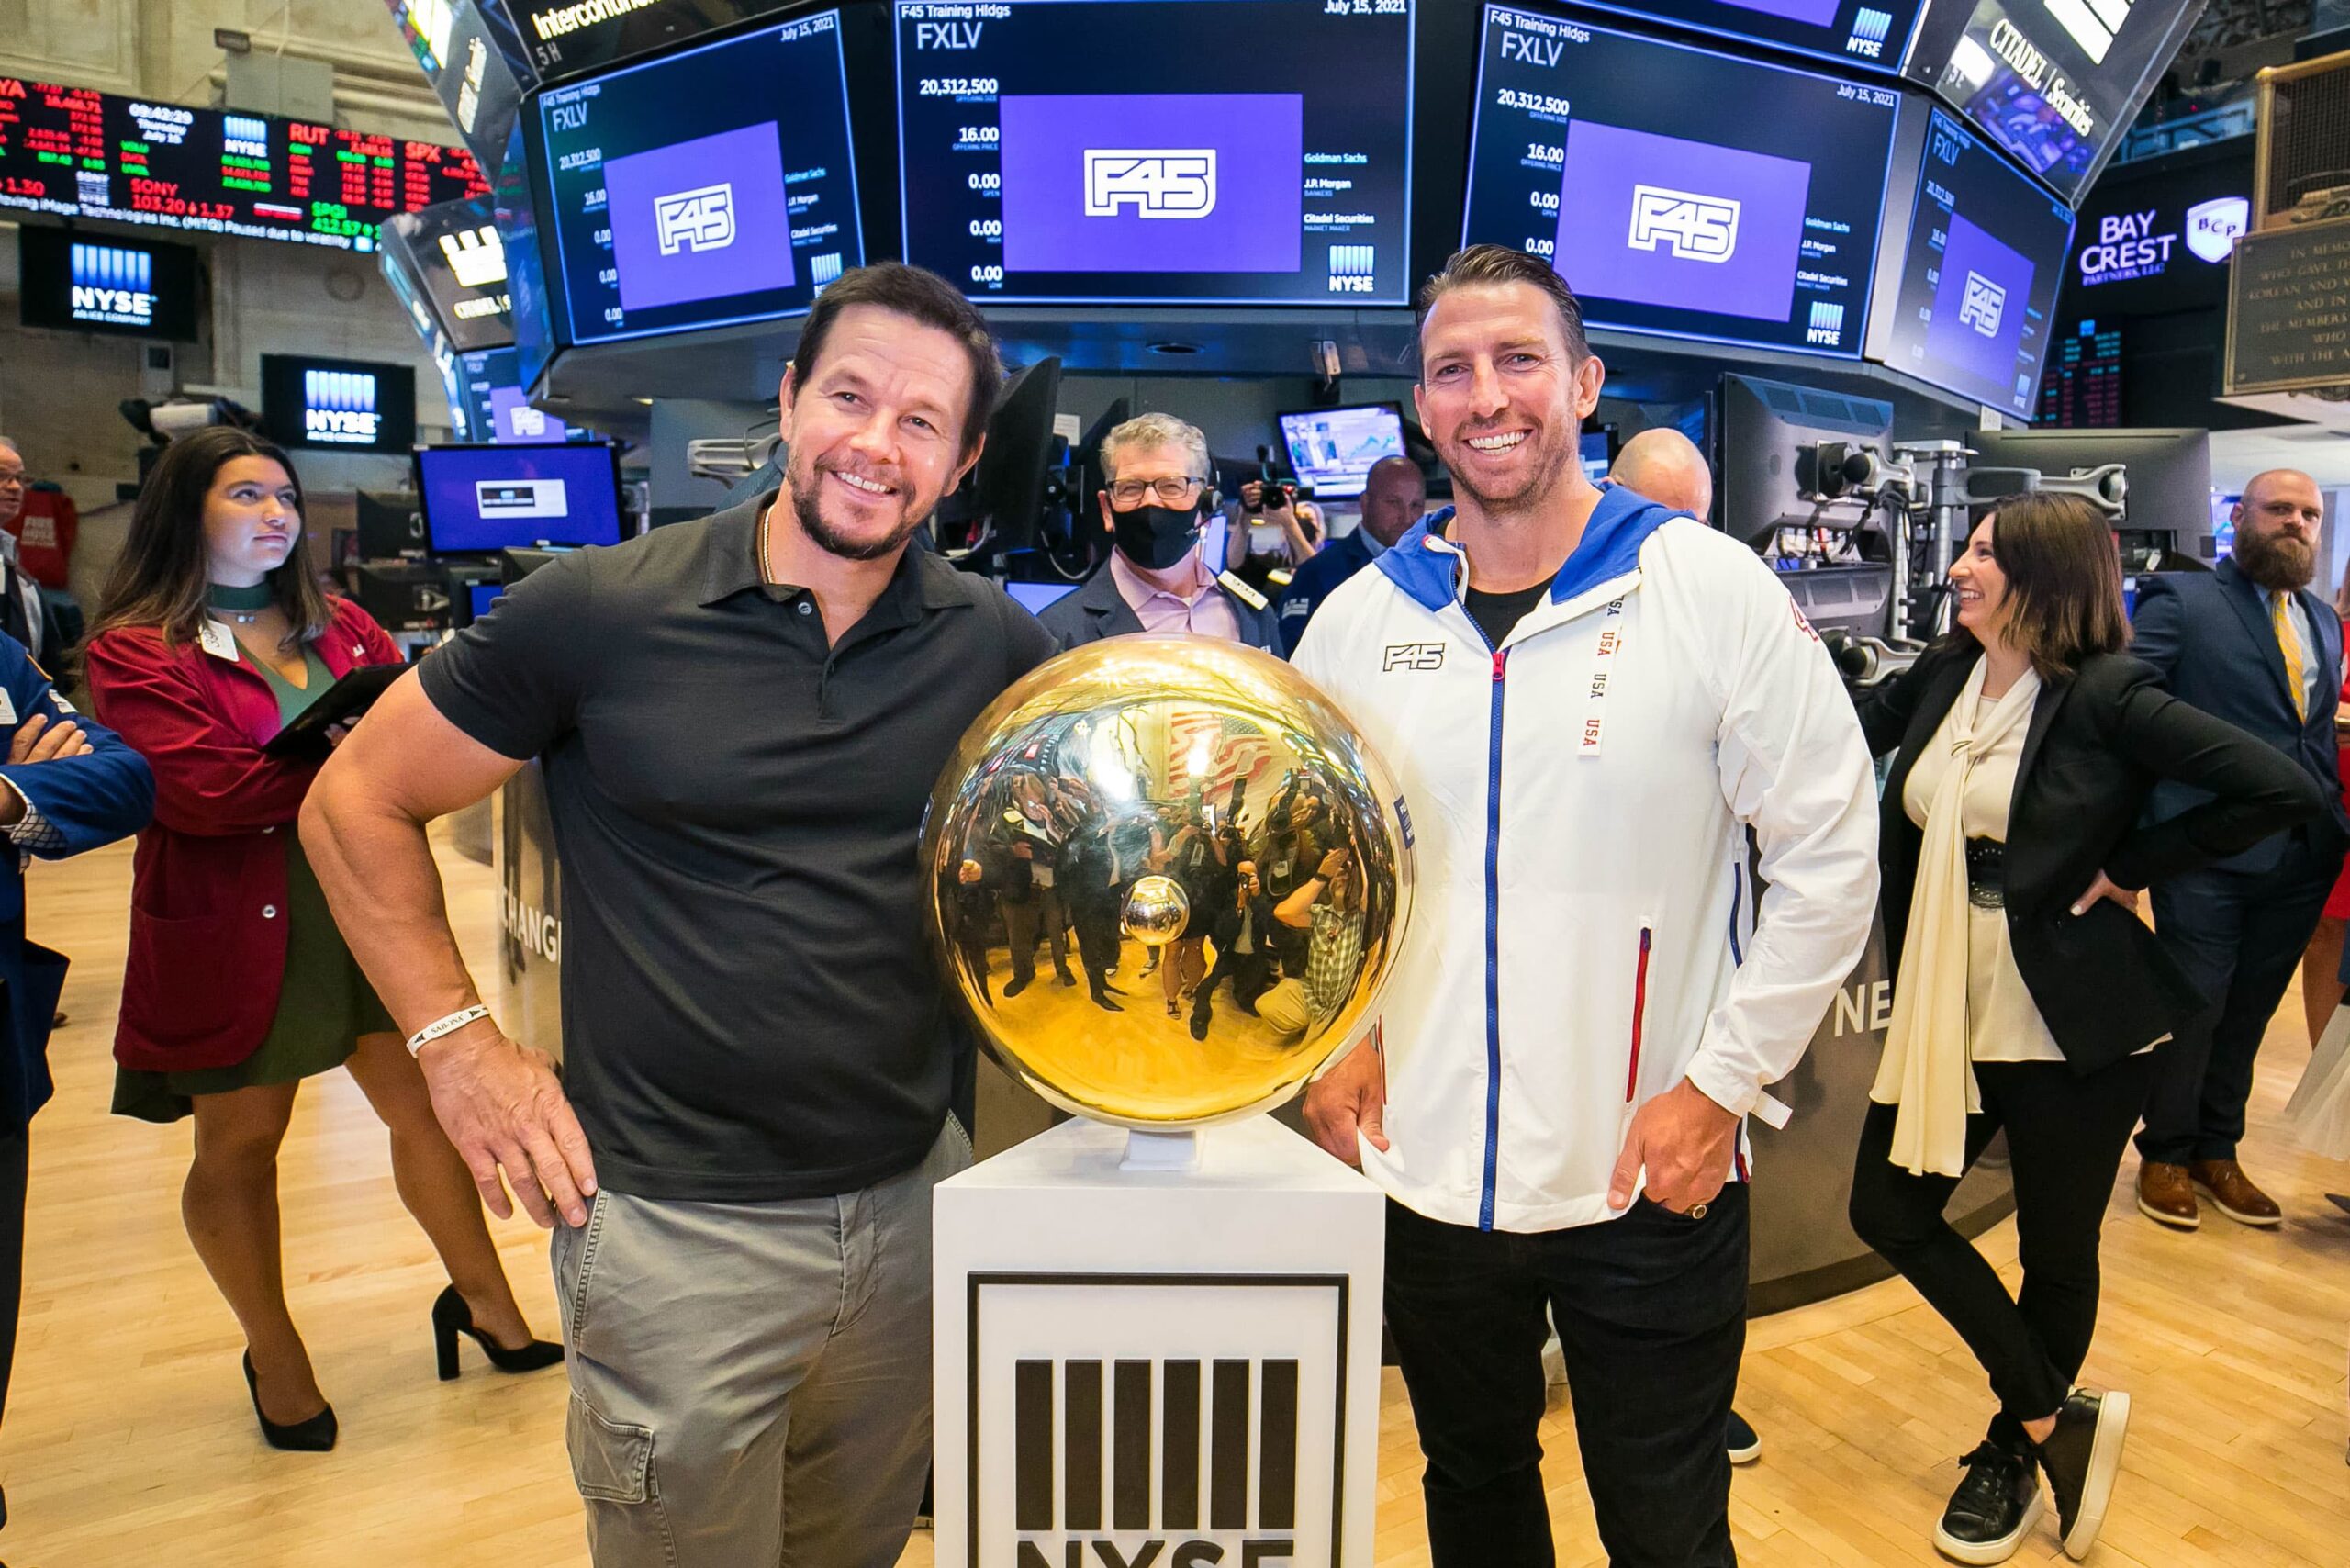 Mark Wahlberg-backed F45 pops on IPO day. The actor touts exercises’ vitality